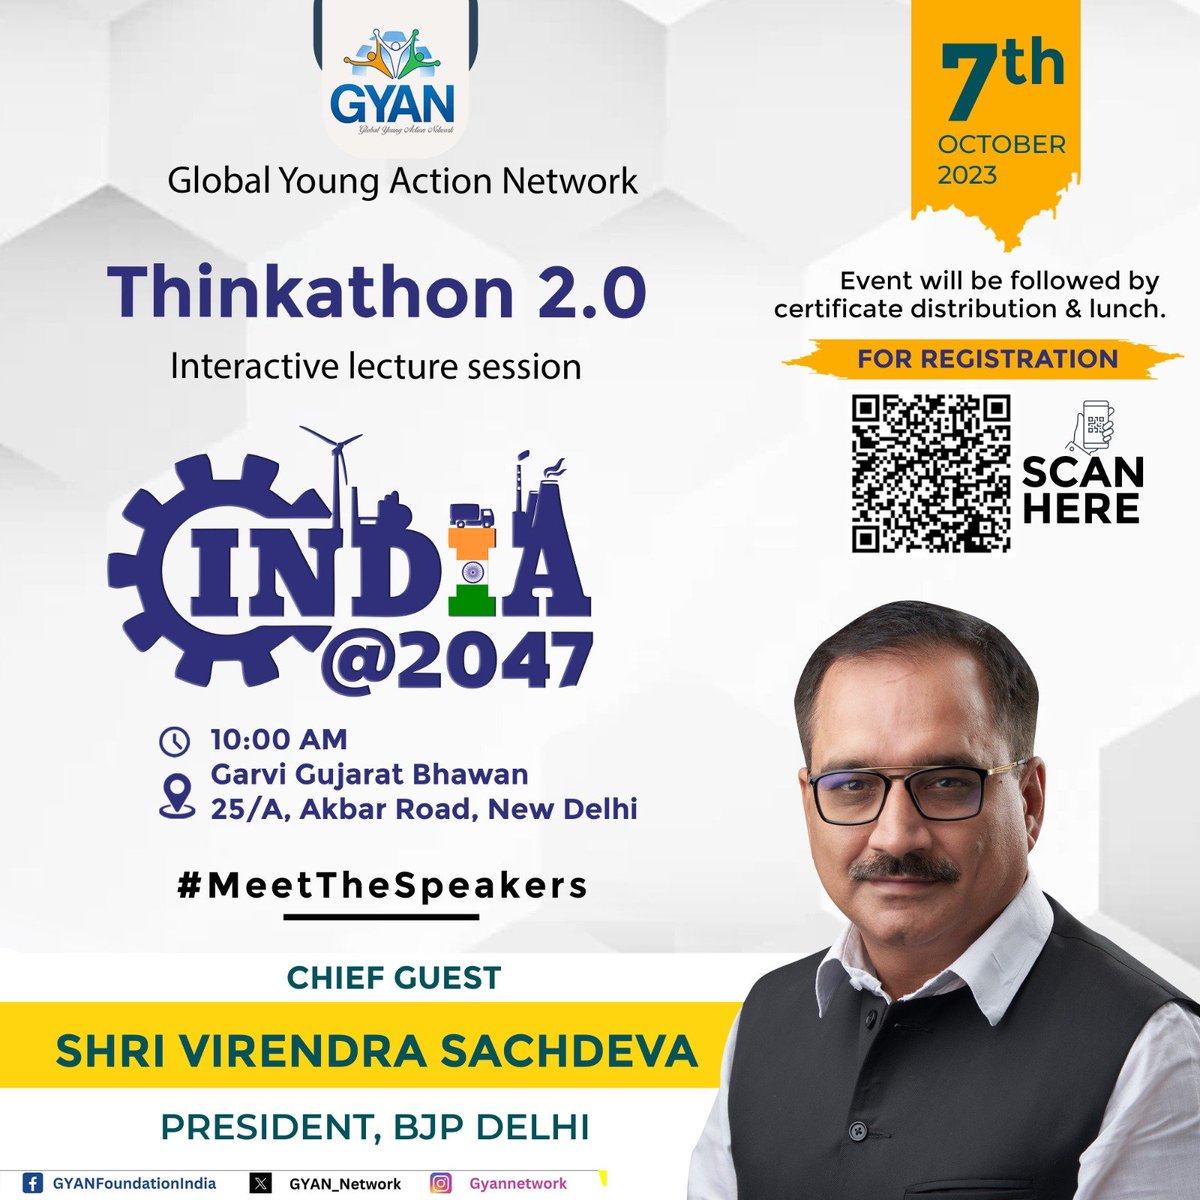 We are delighted to announce our Speaker on the Topic 'INDIA@2047', Shri Virendra Sachdeva, Delhi State President.

Will deliver his insights on India's Journey to Super Power Fueled by People's Aspirations, Economy, and Cultural Diversity. #MeetTheSpeakers

Team
GYAN